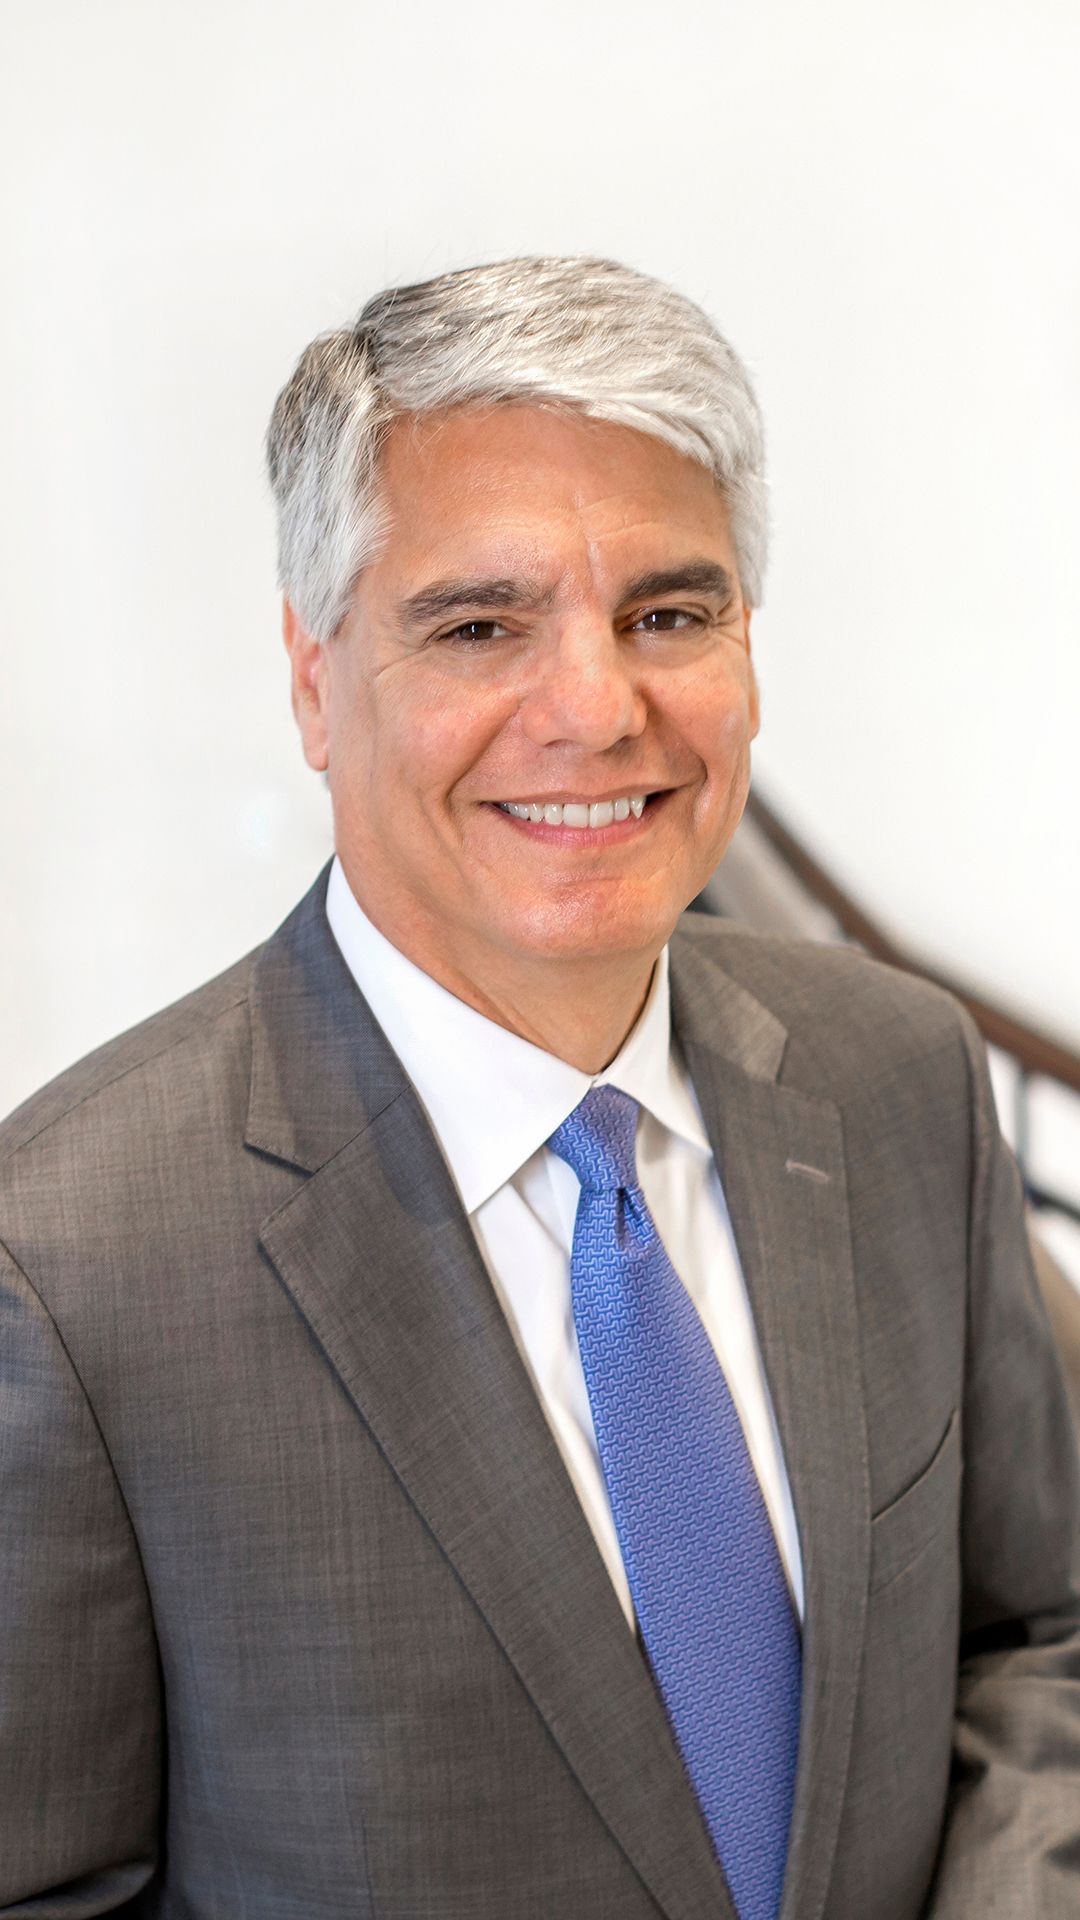 Portrait of newly elected president of Emory Gregory L. Fenves